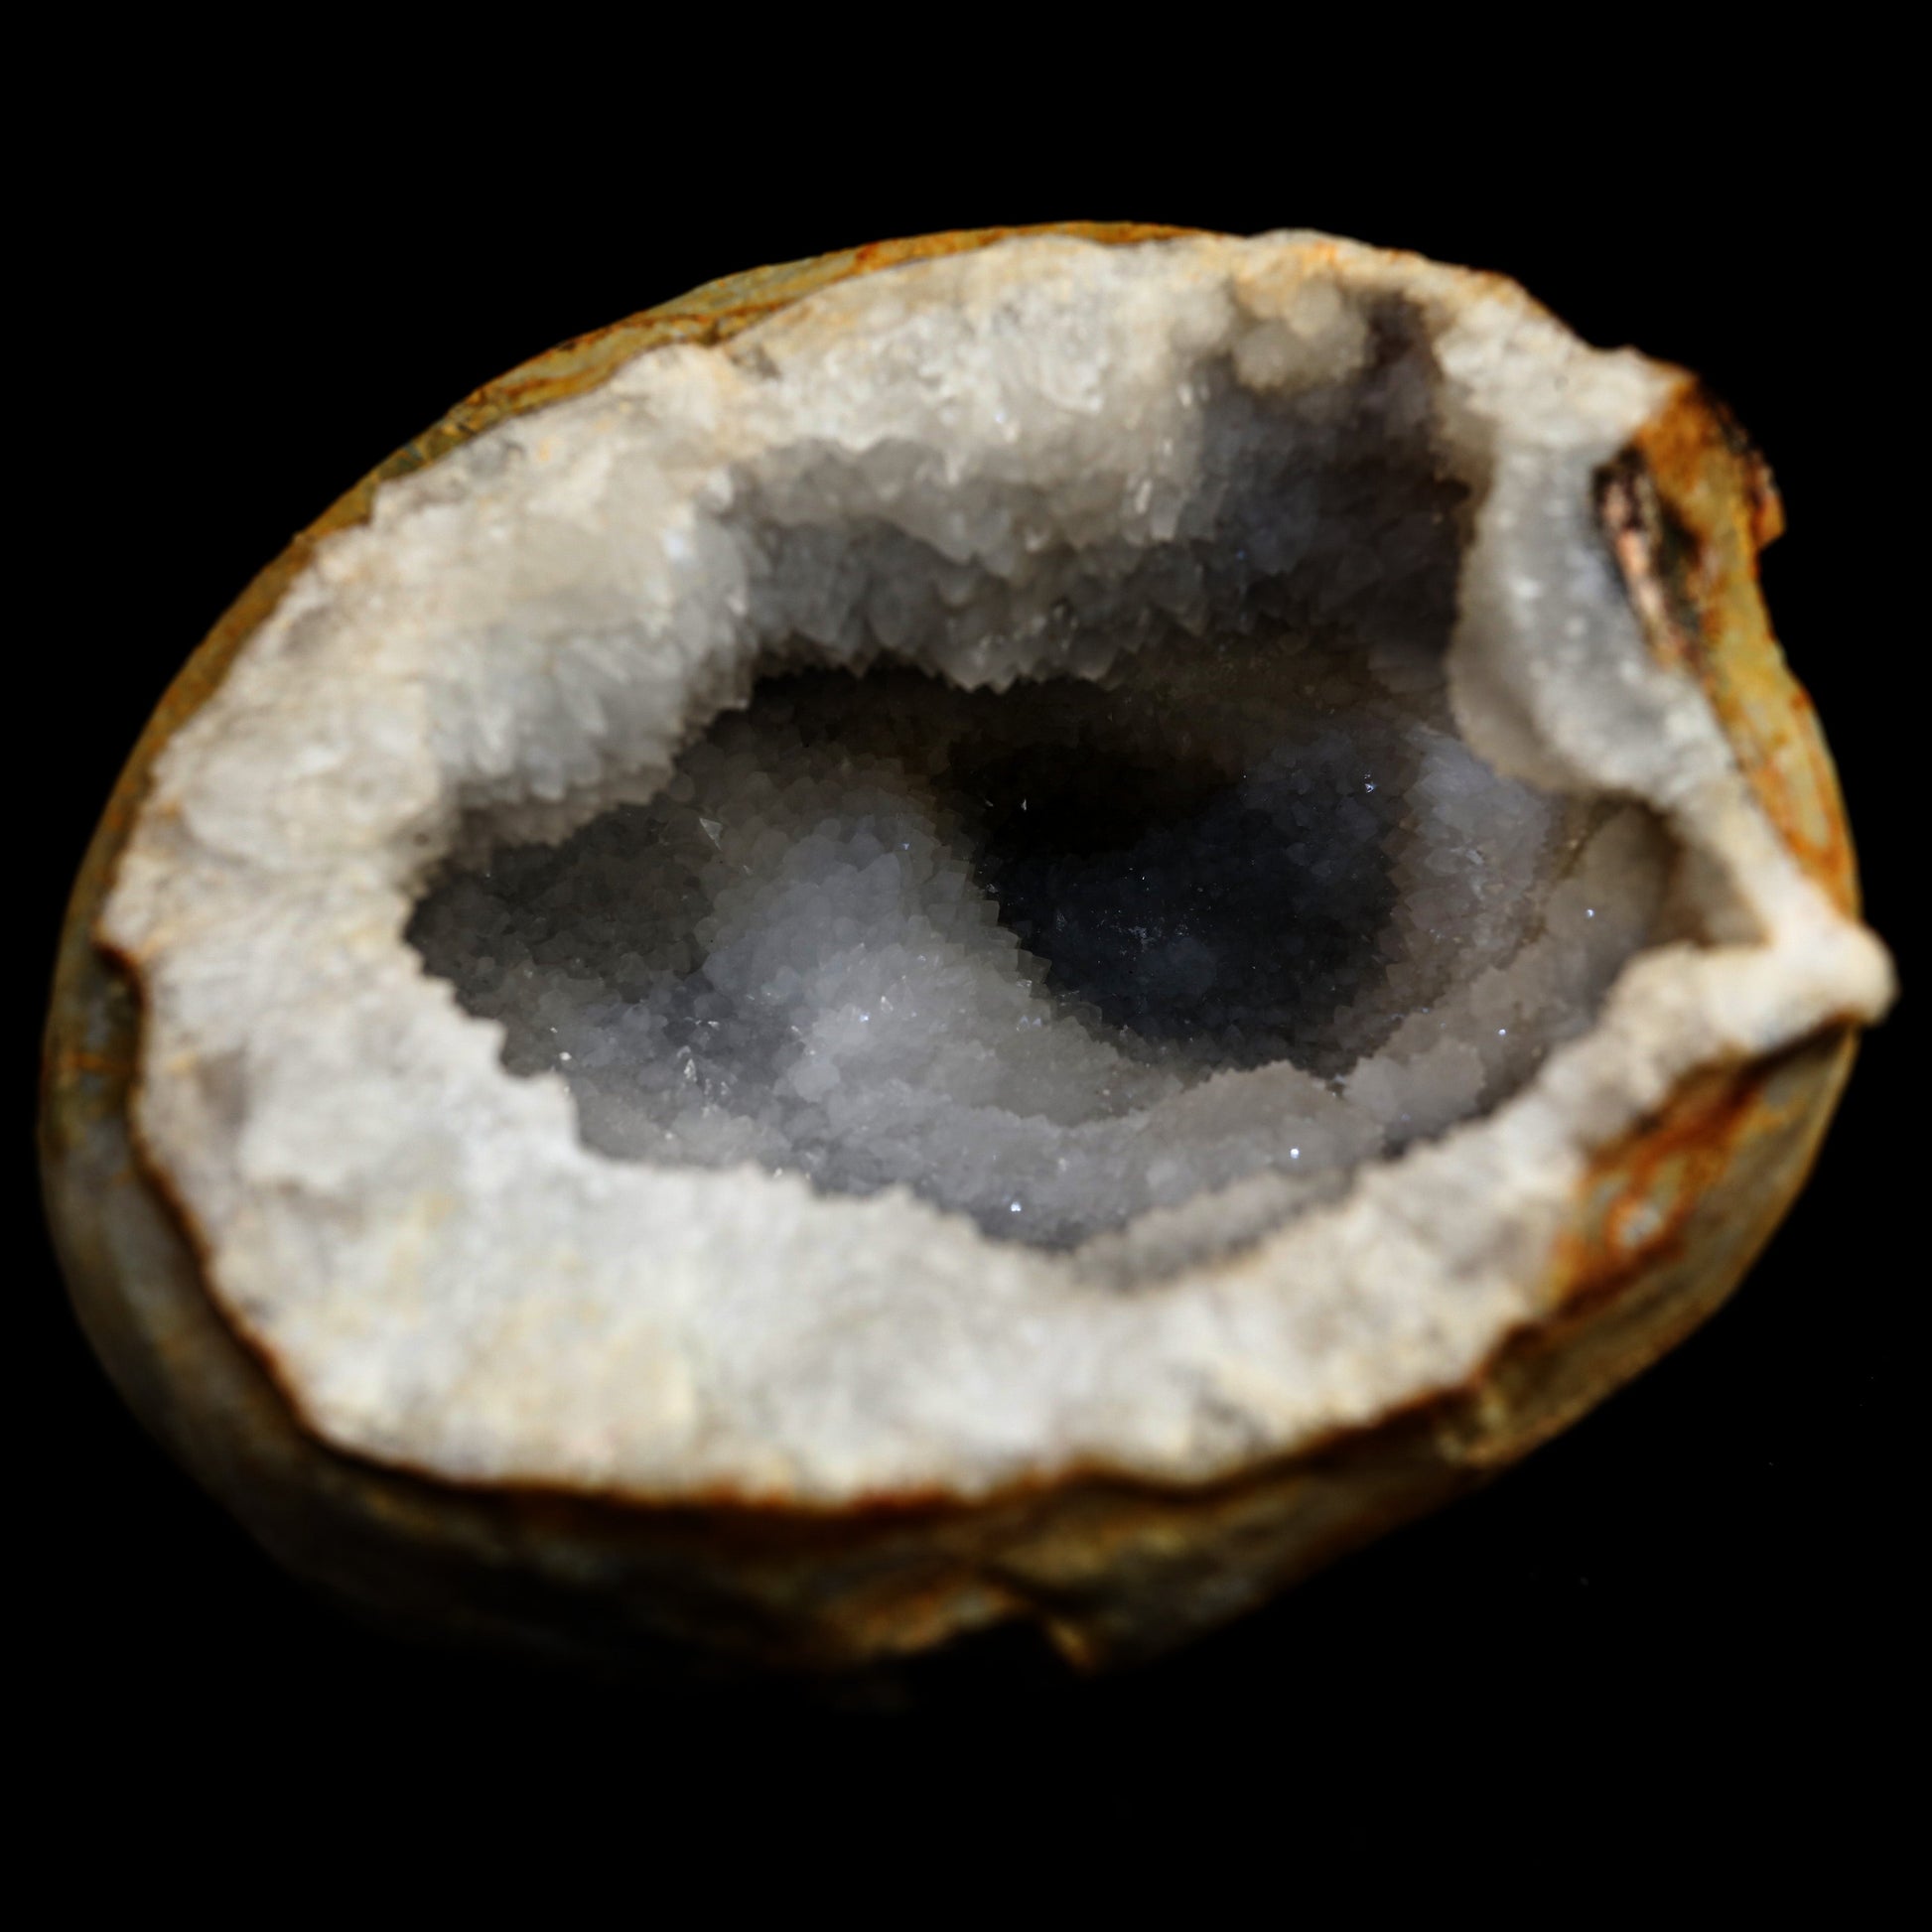 MM Quartz Geode Natural Mineral Specimen # B 5061  https://www.superbminerals.us/products/mm-quartz-geode-natural-mineral-specimen-b-5061  Features: With a geode lined with beige, glossy MM Quartz crystals, this is a beautiful piece. The crystals have a glossy, almost crystalline sheen to them, and their edges are sharp. This item has a gleaming sheen to it.